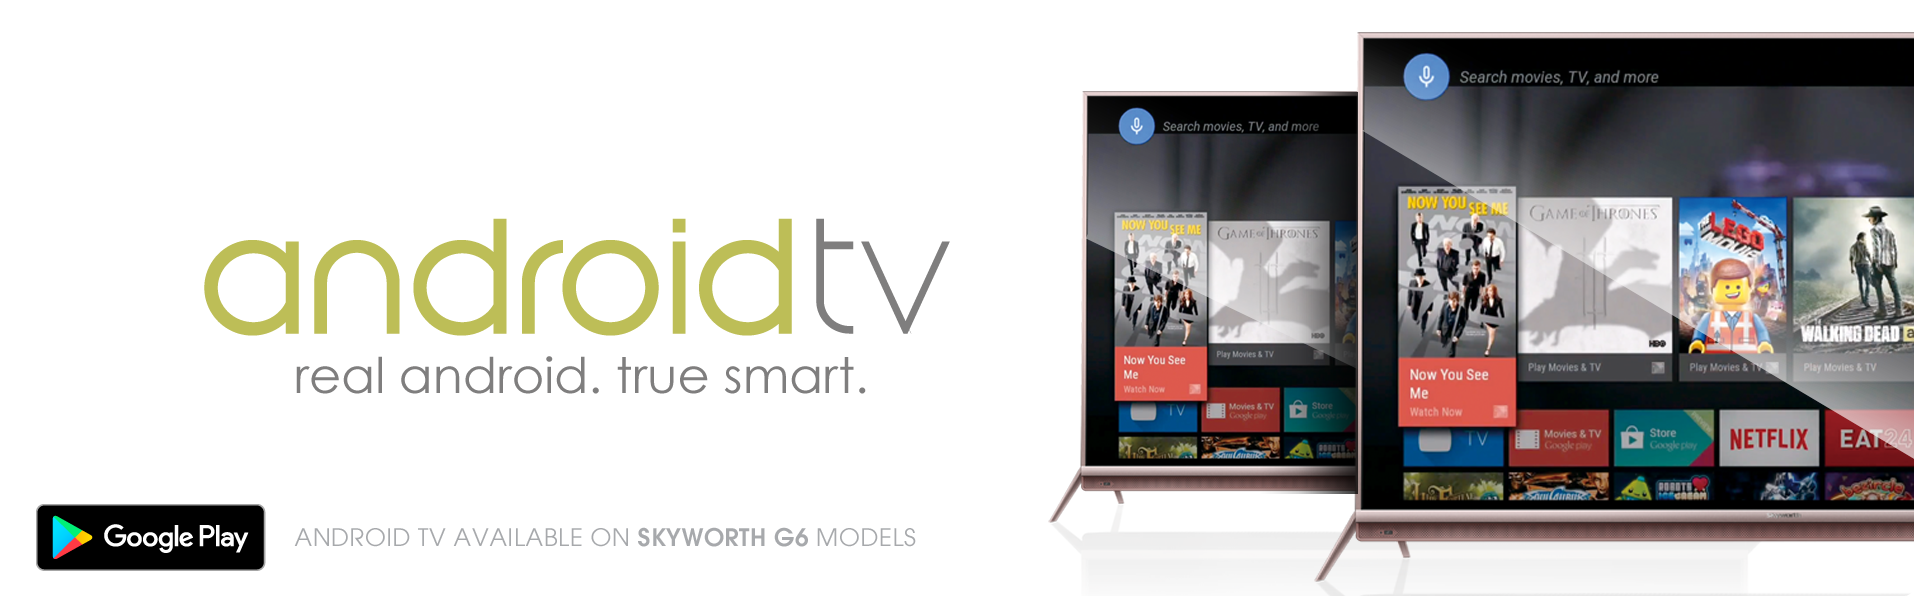 What You Need To Know About The Skyworth Android Tv Stuff - roblox android tv